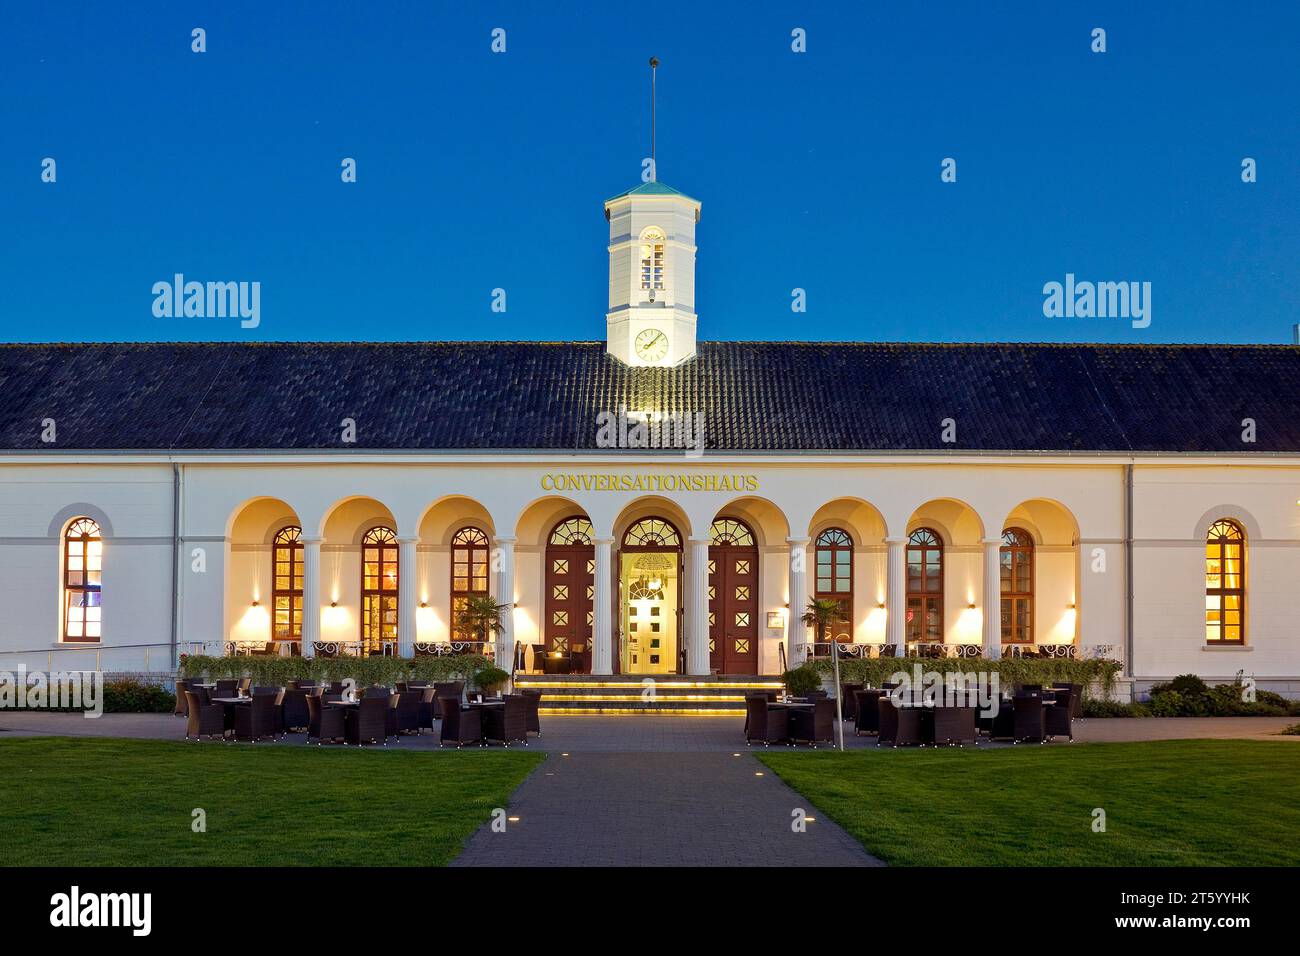 Illuminated Conversationshaus with spa garden in the evening, Norderney Island, Lower Saxony, Germany Stock Photo